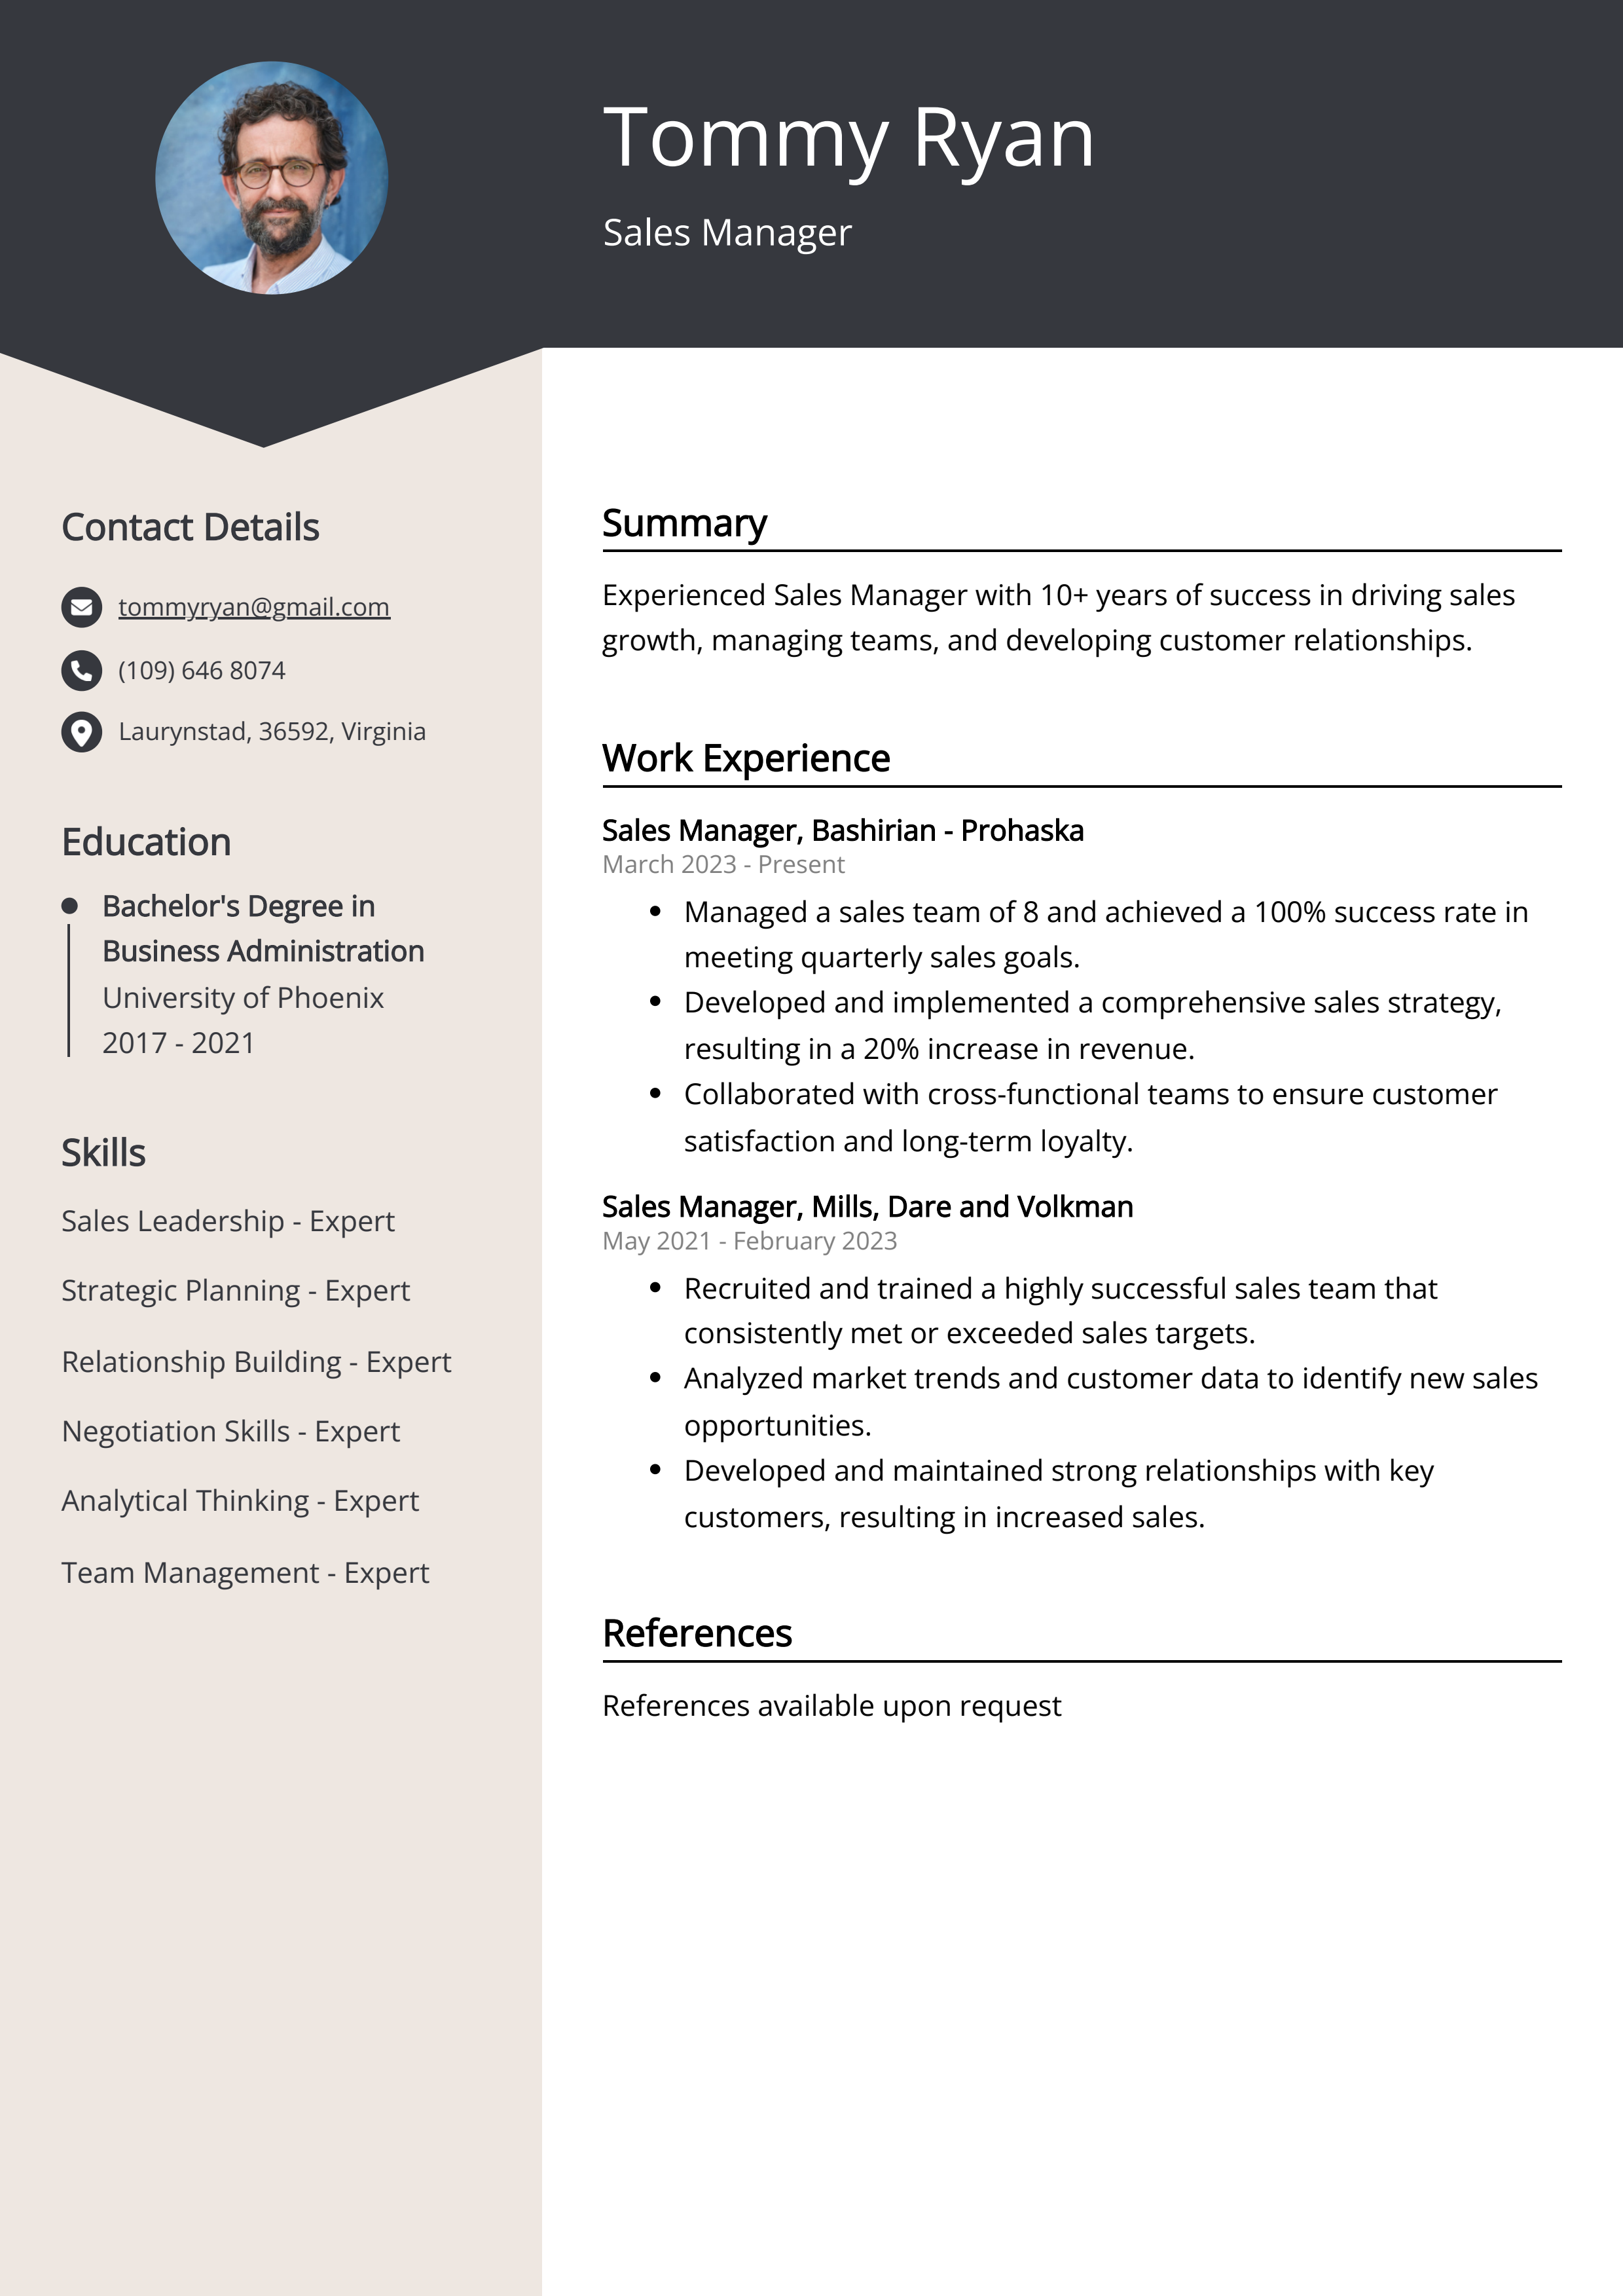 Sales Manager CV Example